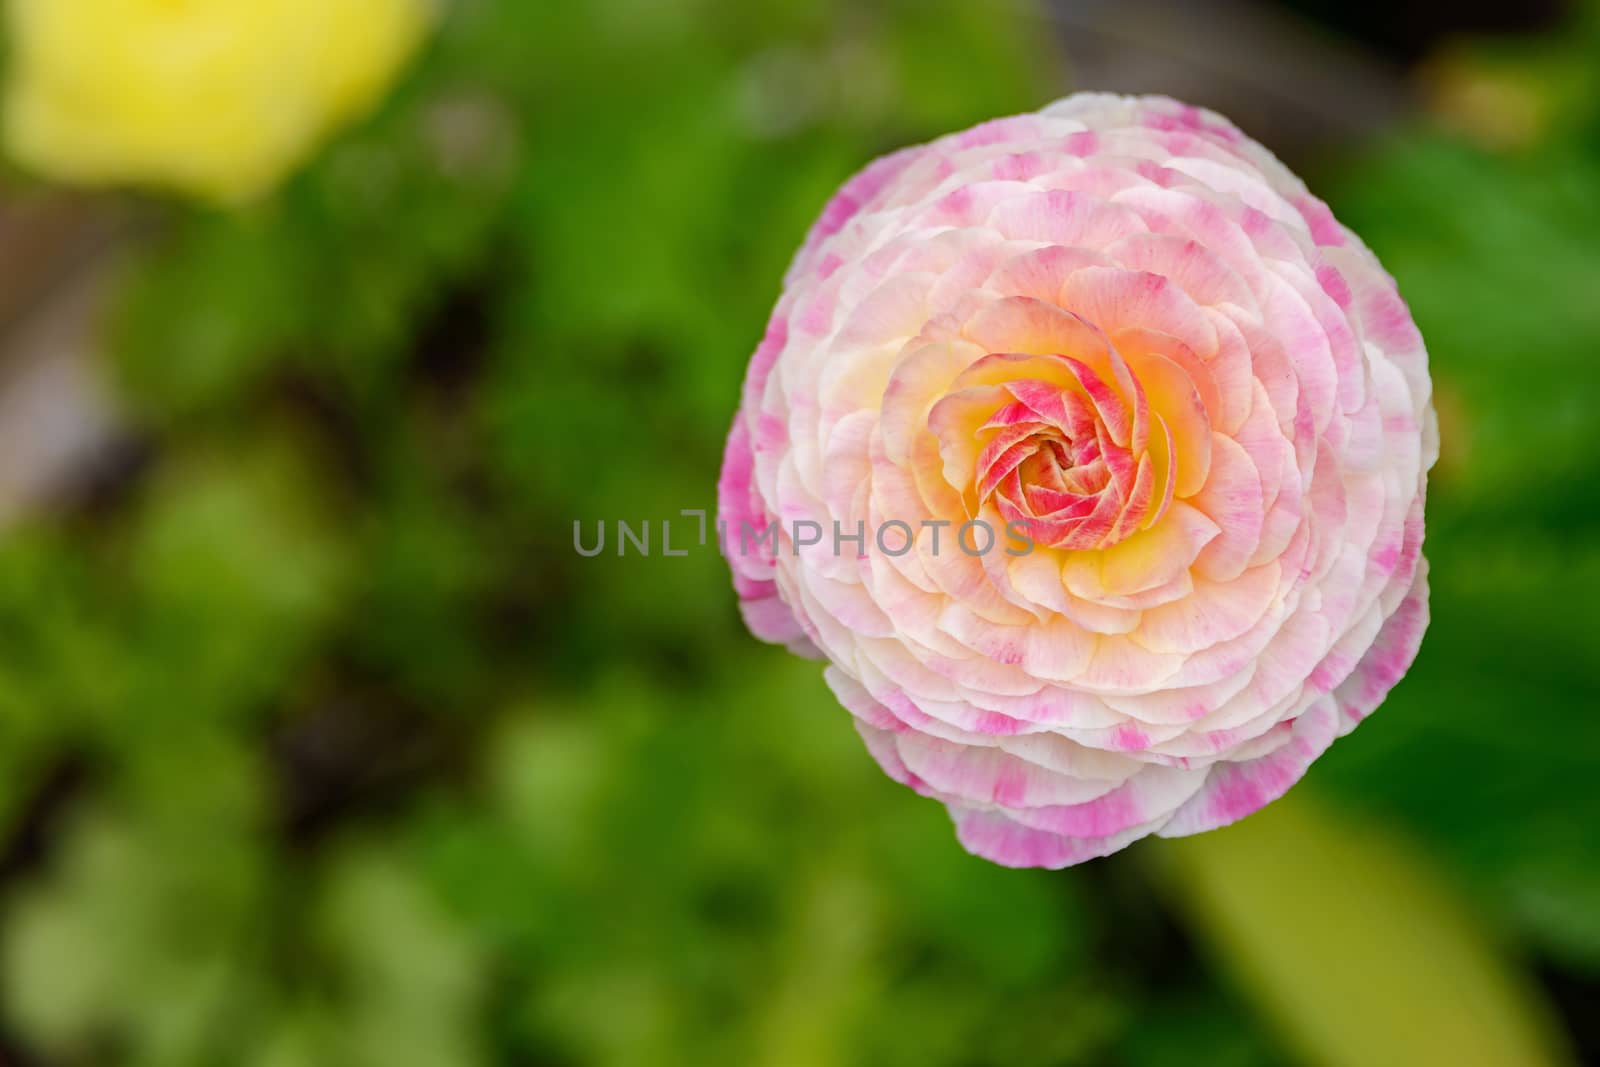 Openwork petals of a white-pink ranunculus flower on a blurred background with green spots of leaves and grass on dark ground.